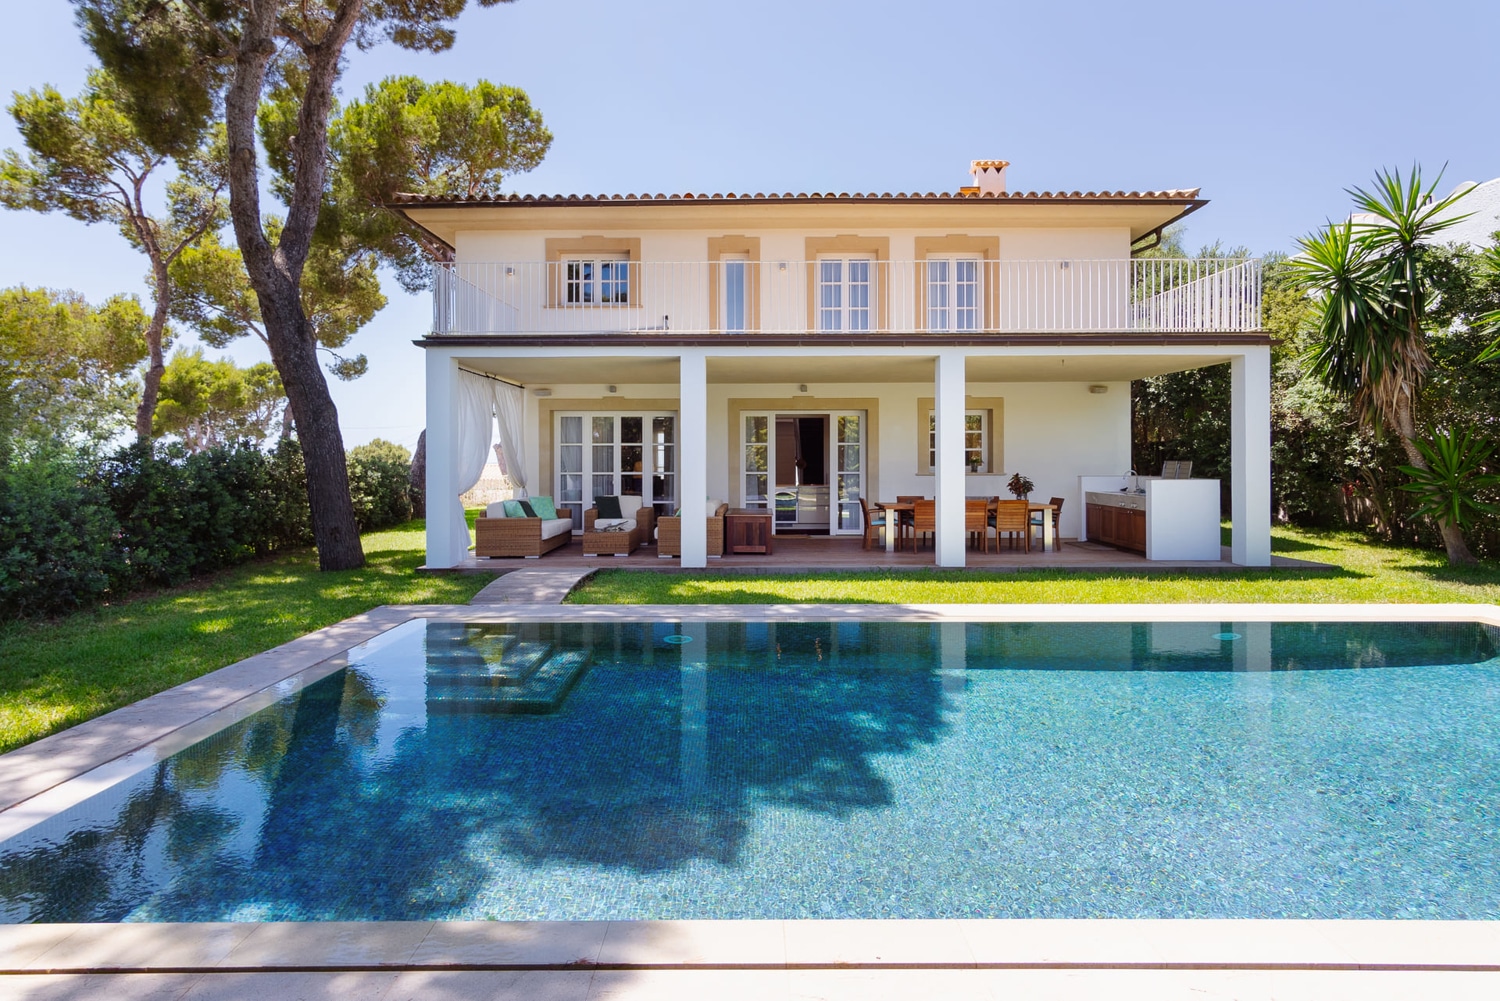 Exquisite Villa in Costa d’en Blanes with Pool and Breathtaking Views to the Sea